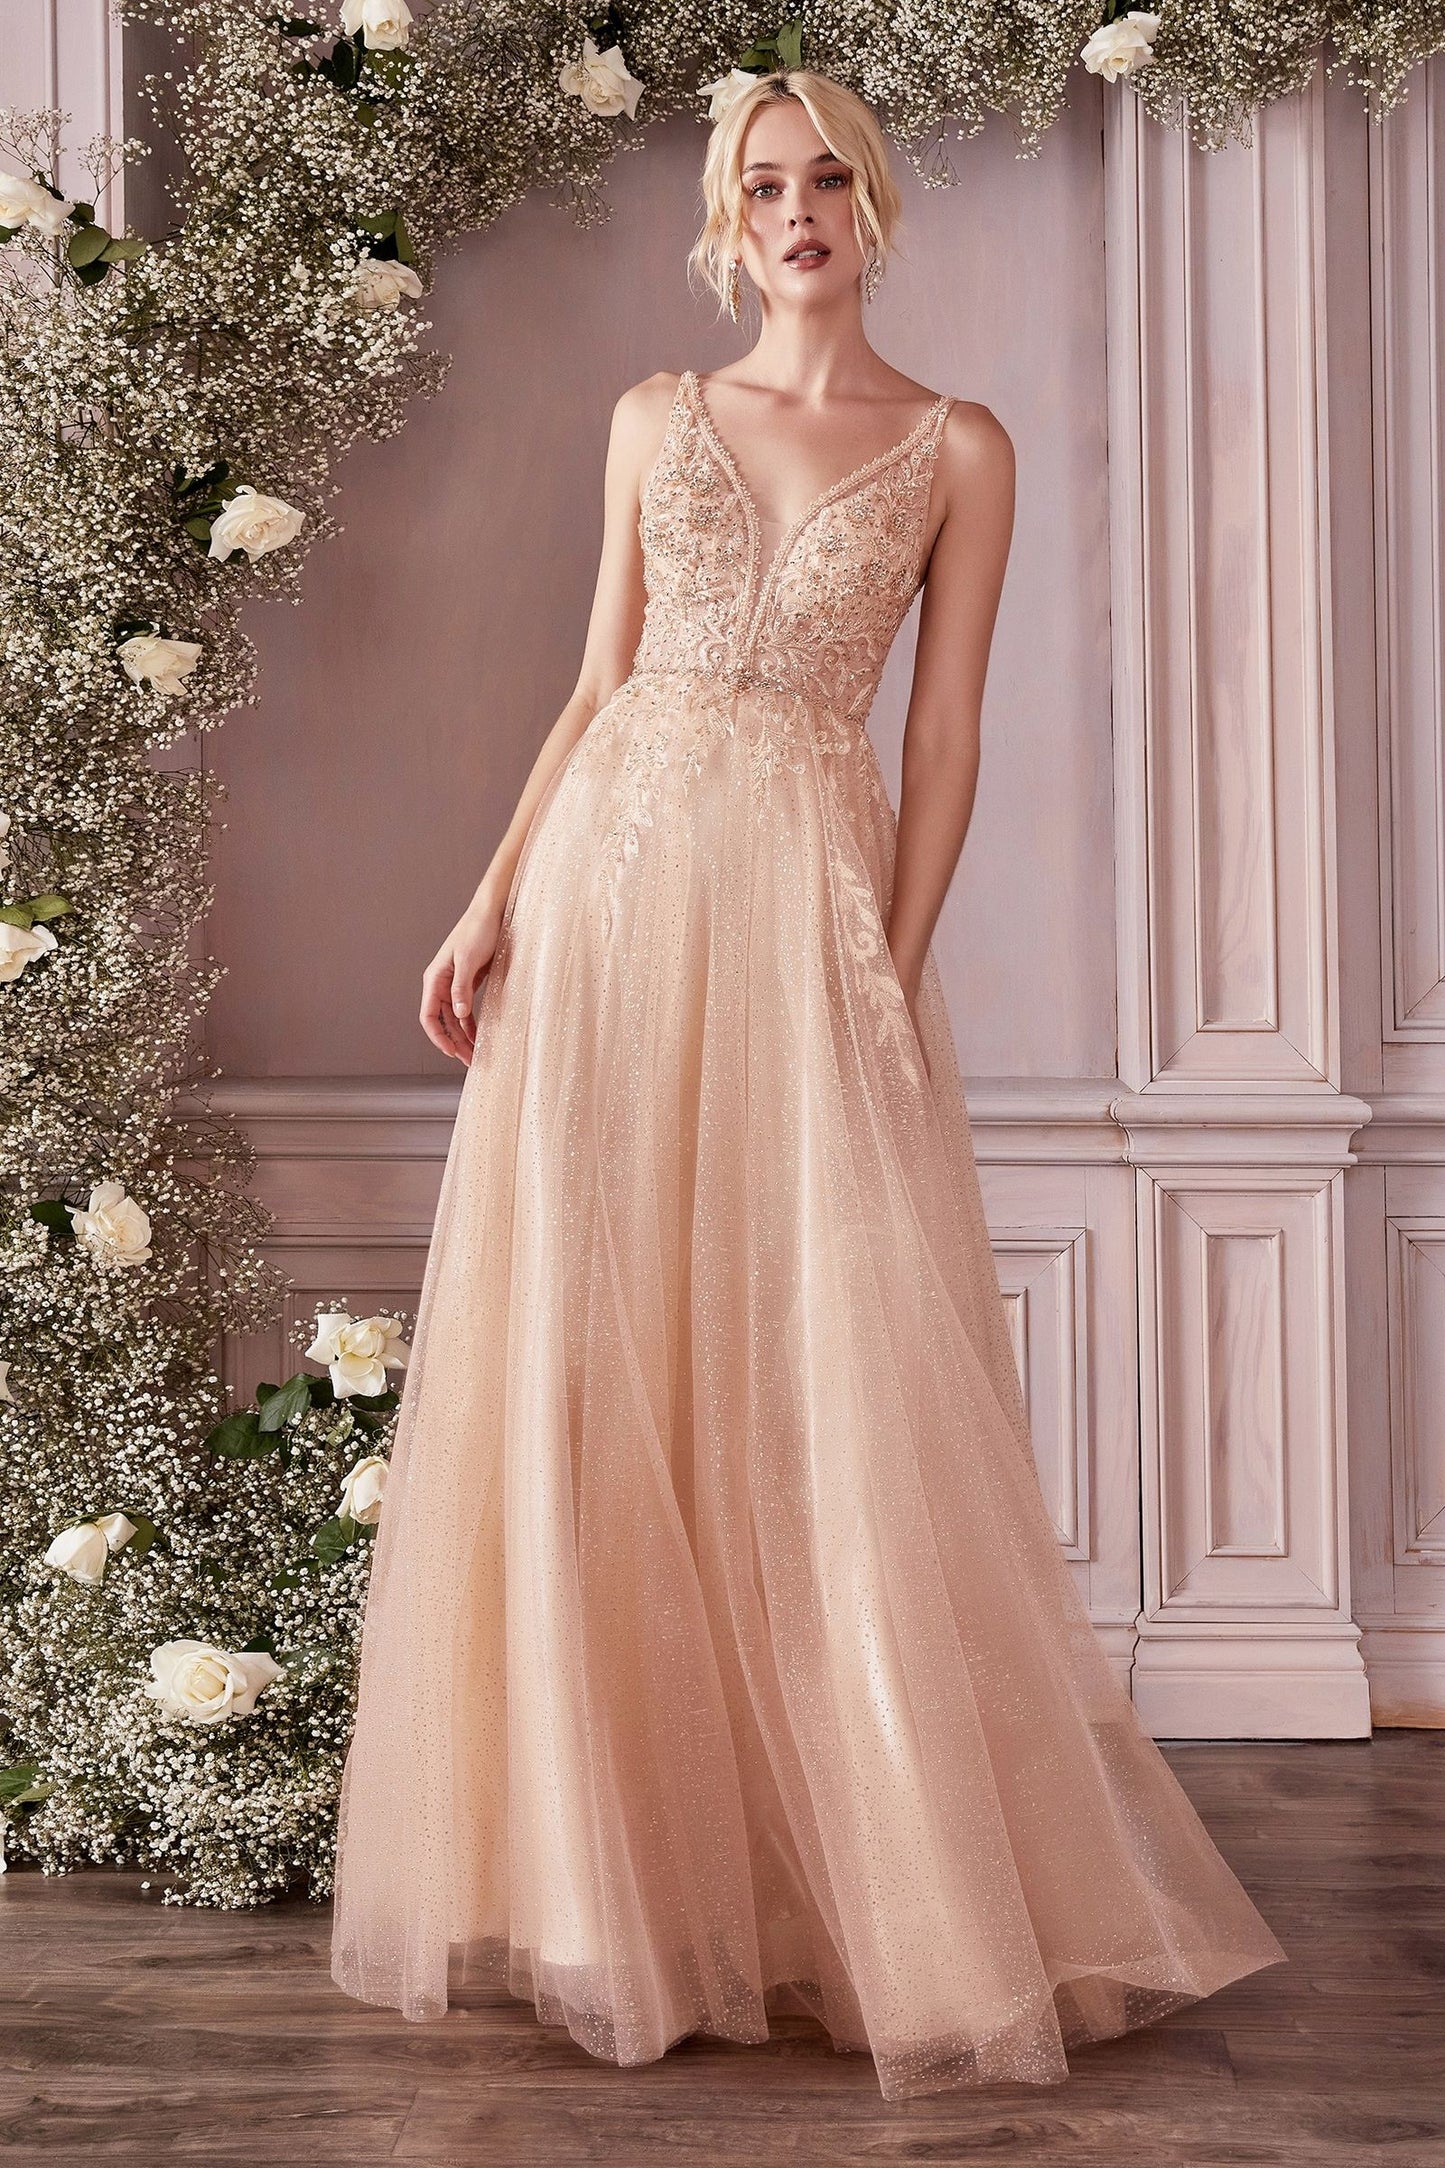 Floaty and Dreamy Layered Tulle A-Line Dress - Ideal for Weddings and Proms